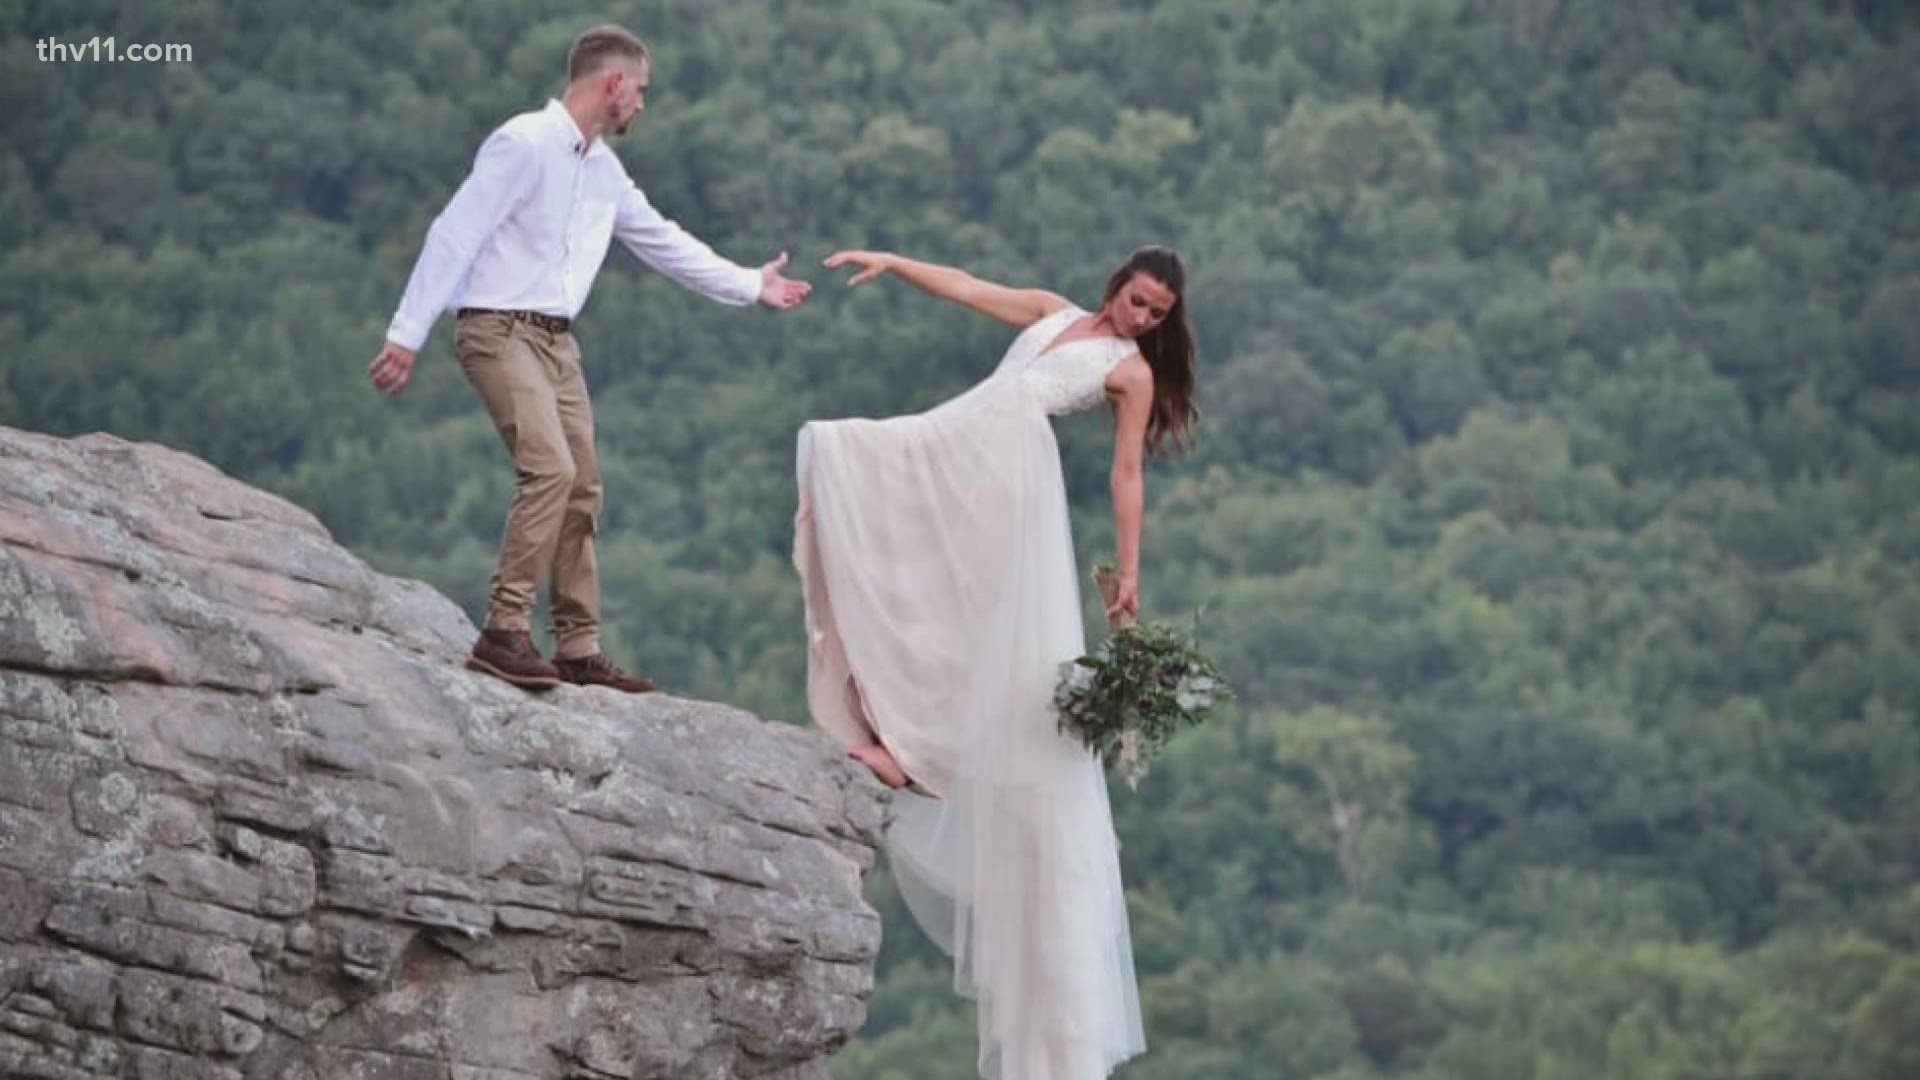 A couple took on Hawskbill Crag at Whitaker's Point in northwest Arkansas and it's definitely not your typical wedding shoot.